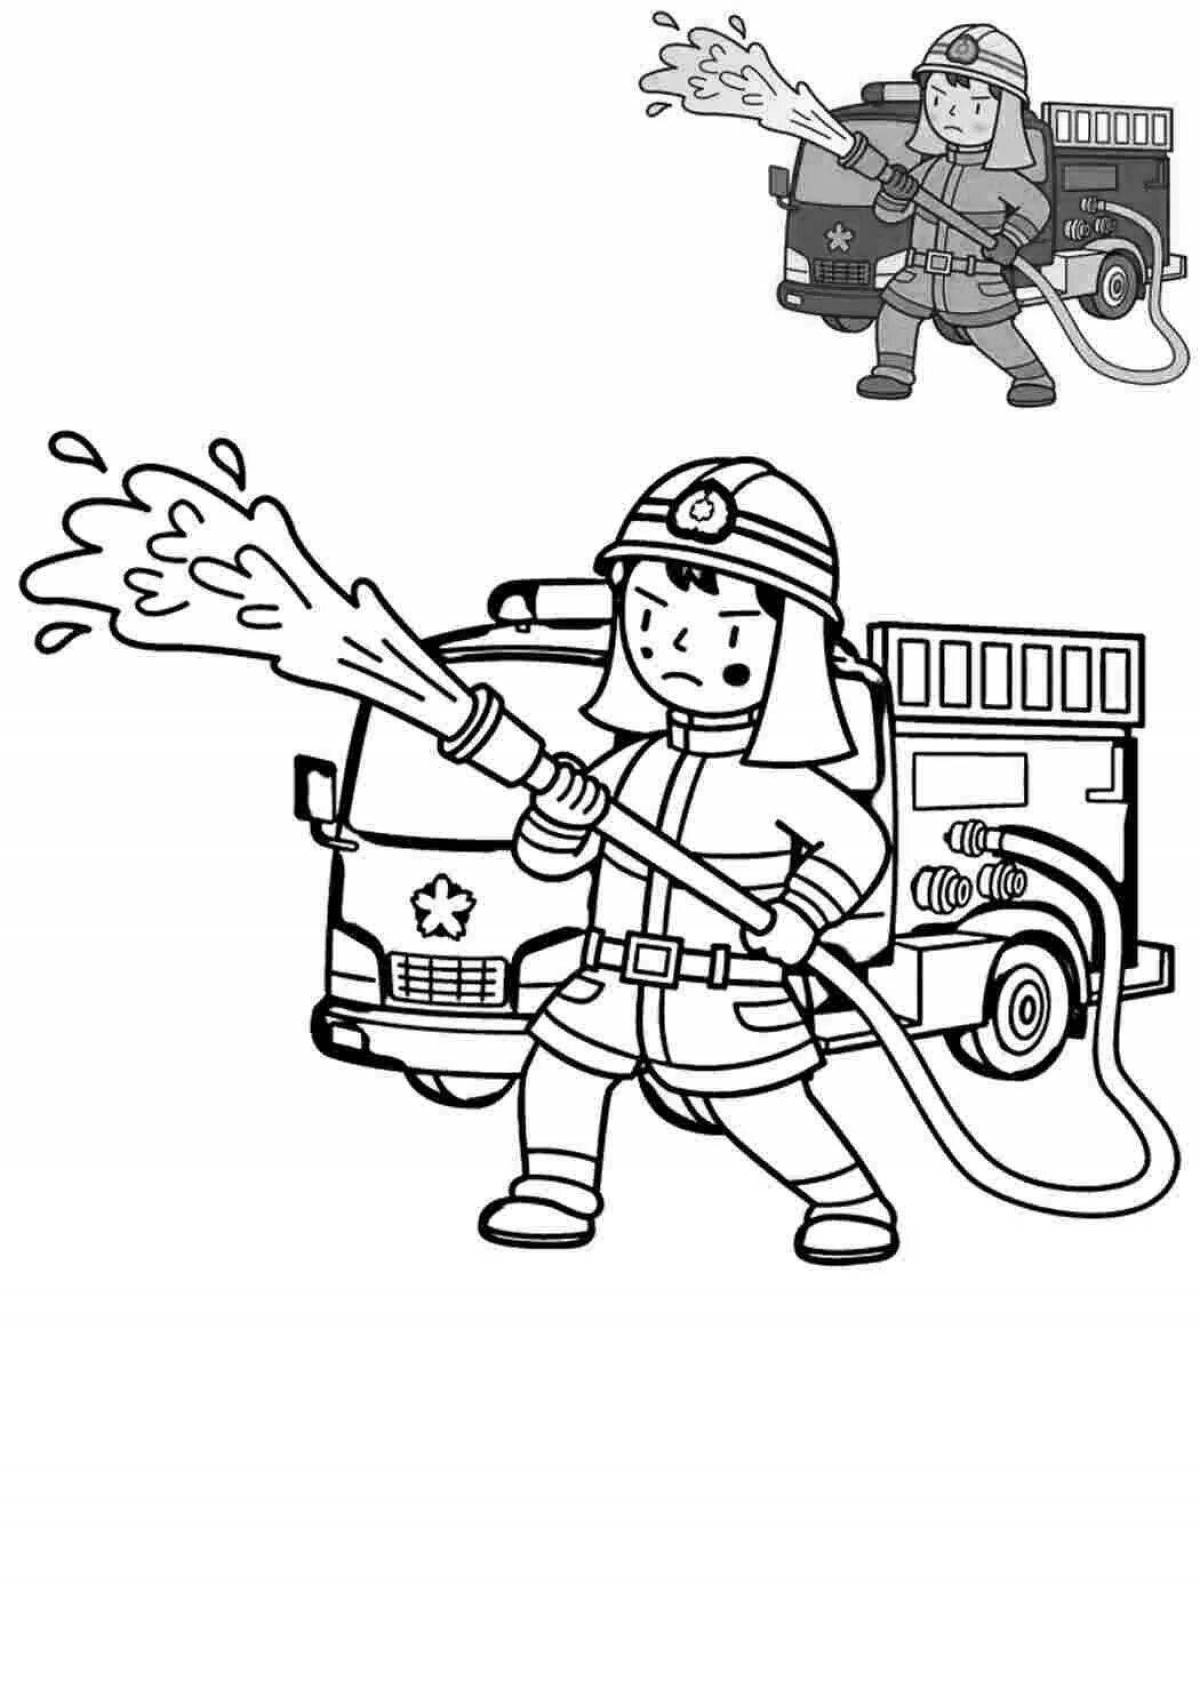 A determined firefighter puts out a fire